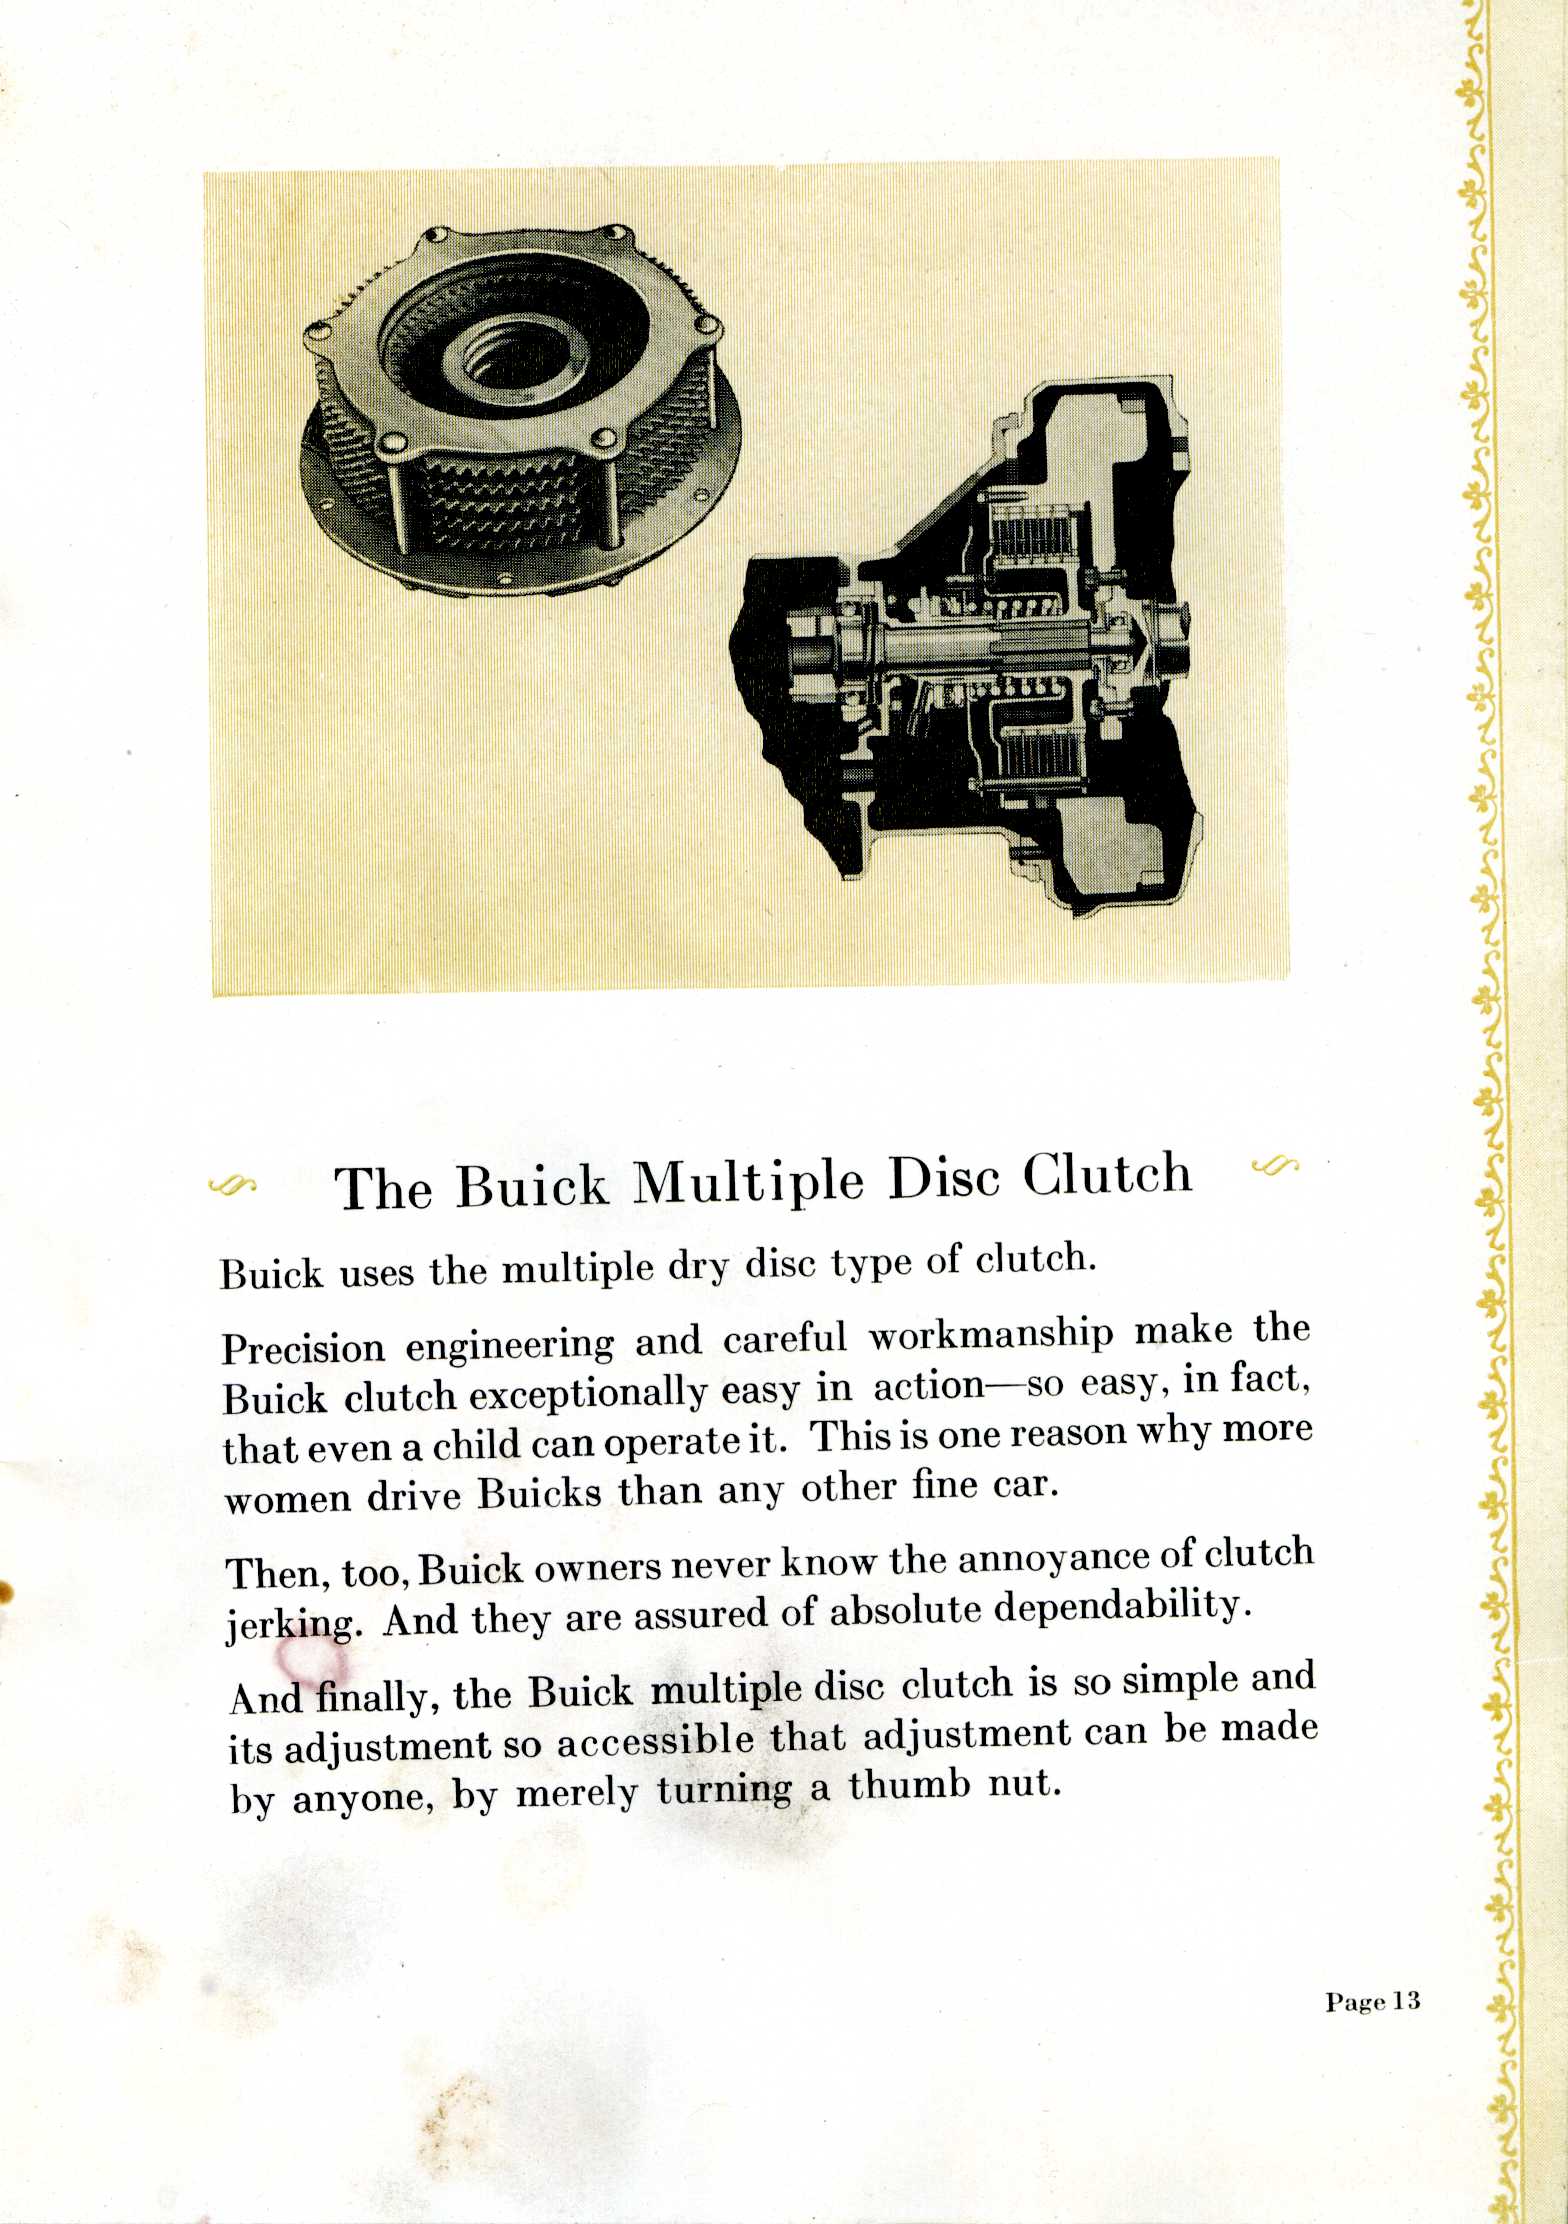 1928 Buick-How to Choose a Motor Car Wisely-13